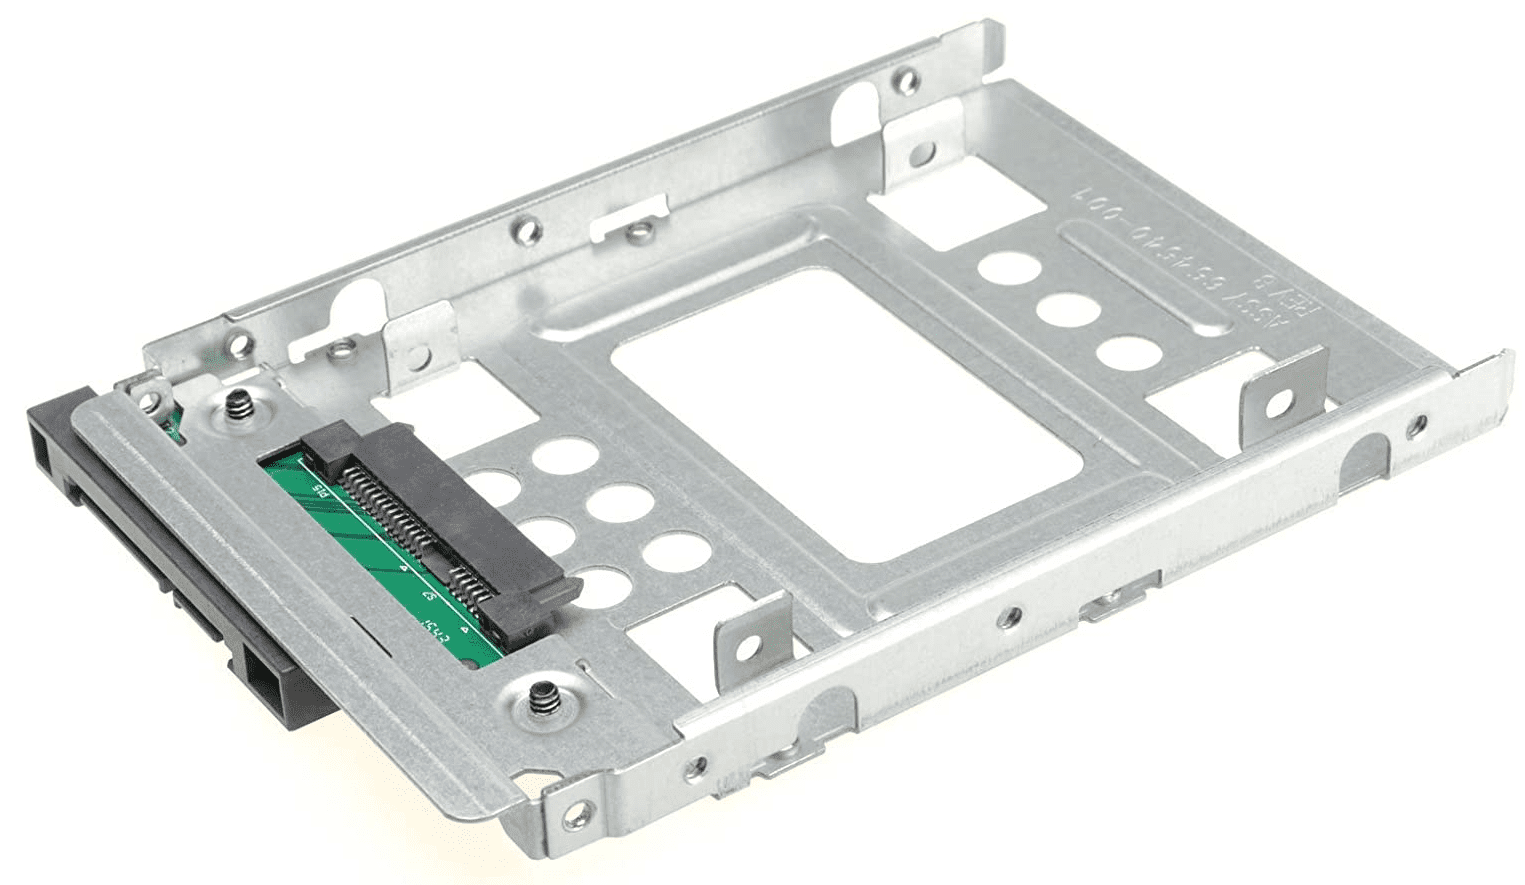 2.5 inch tray for a full 3.5 inch hard drive bay